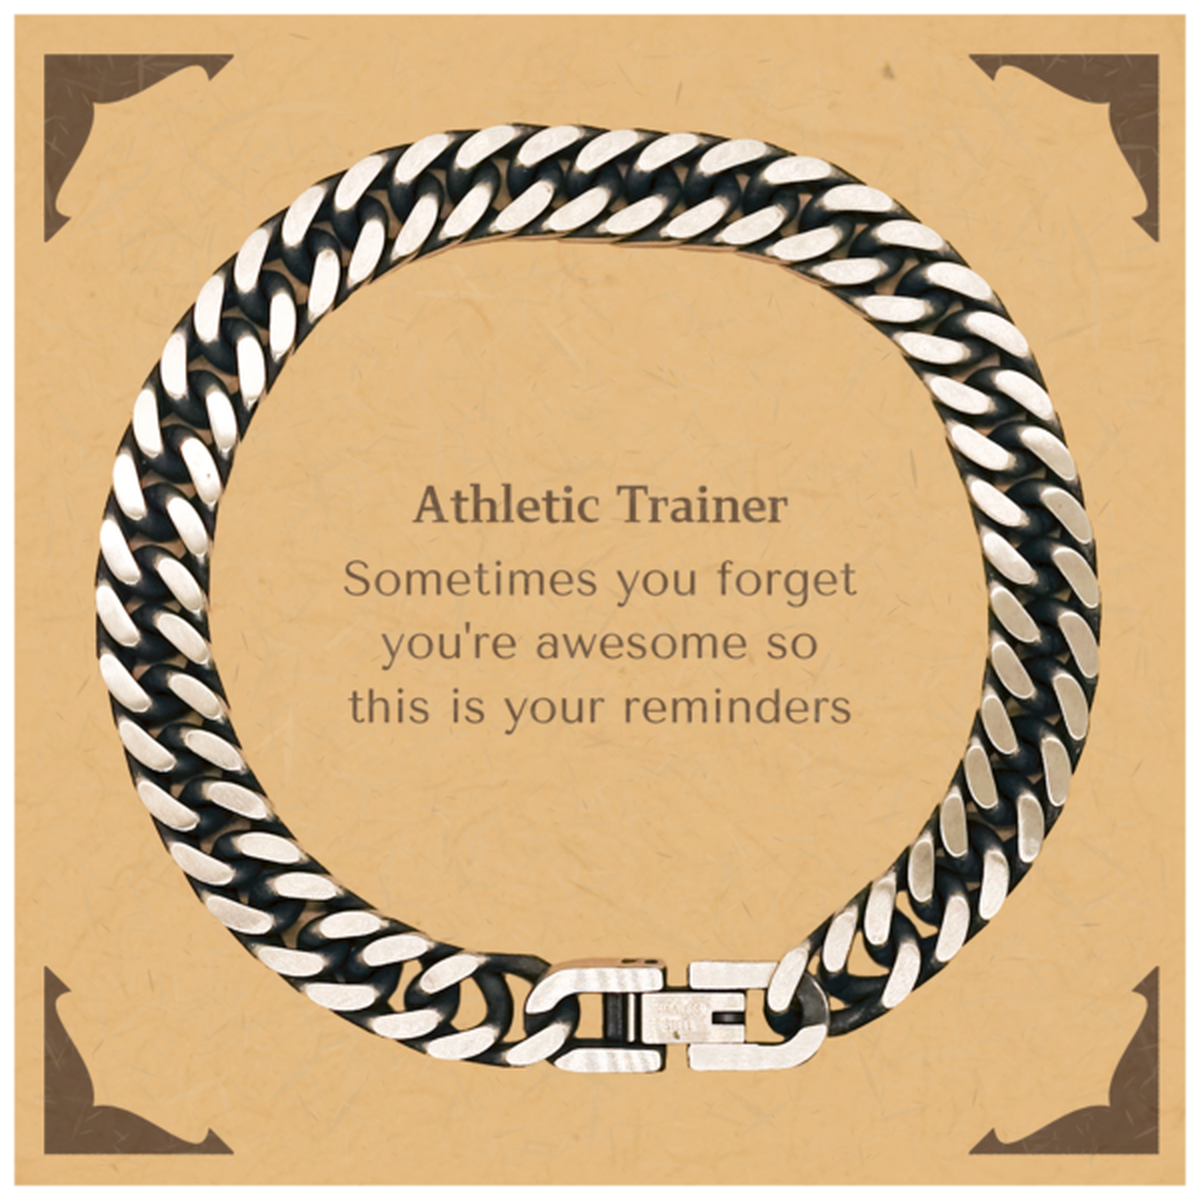 Sentimental Athletic Trainer Cuban Link Chain Bracelet, Athletic Trainer Sometimes you forget you're awesome so this is your reminders, Graduation Christmas Birthday Gifts for Athletic Trainer, Men, Women, Coworkers